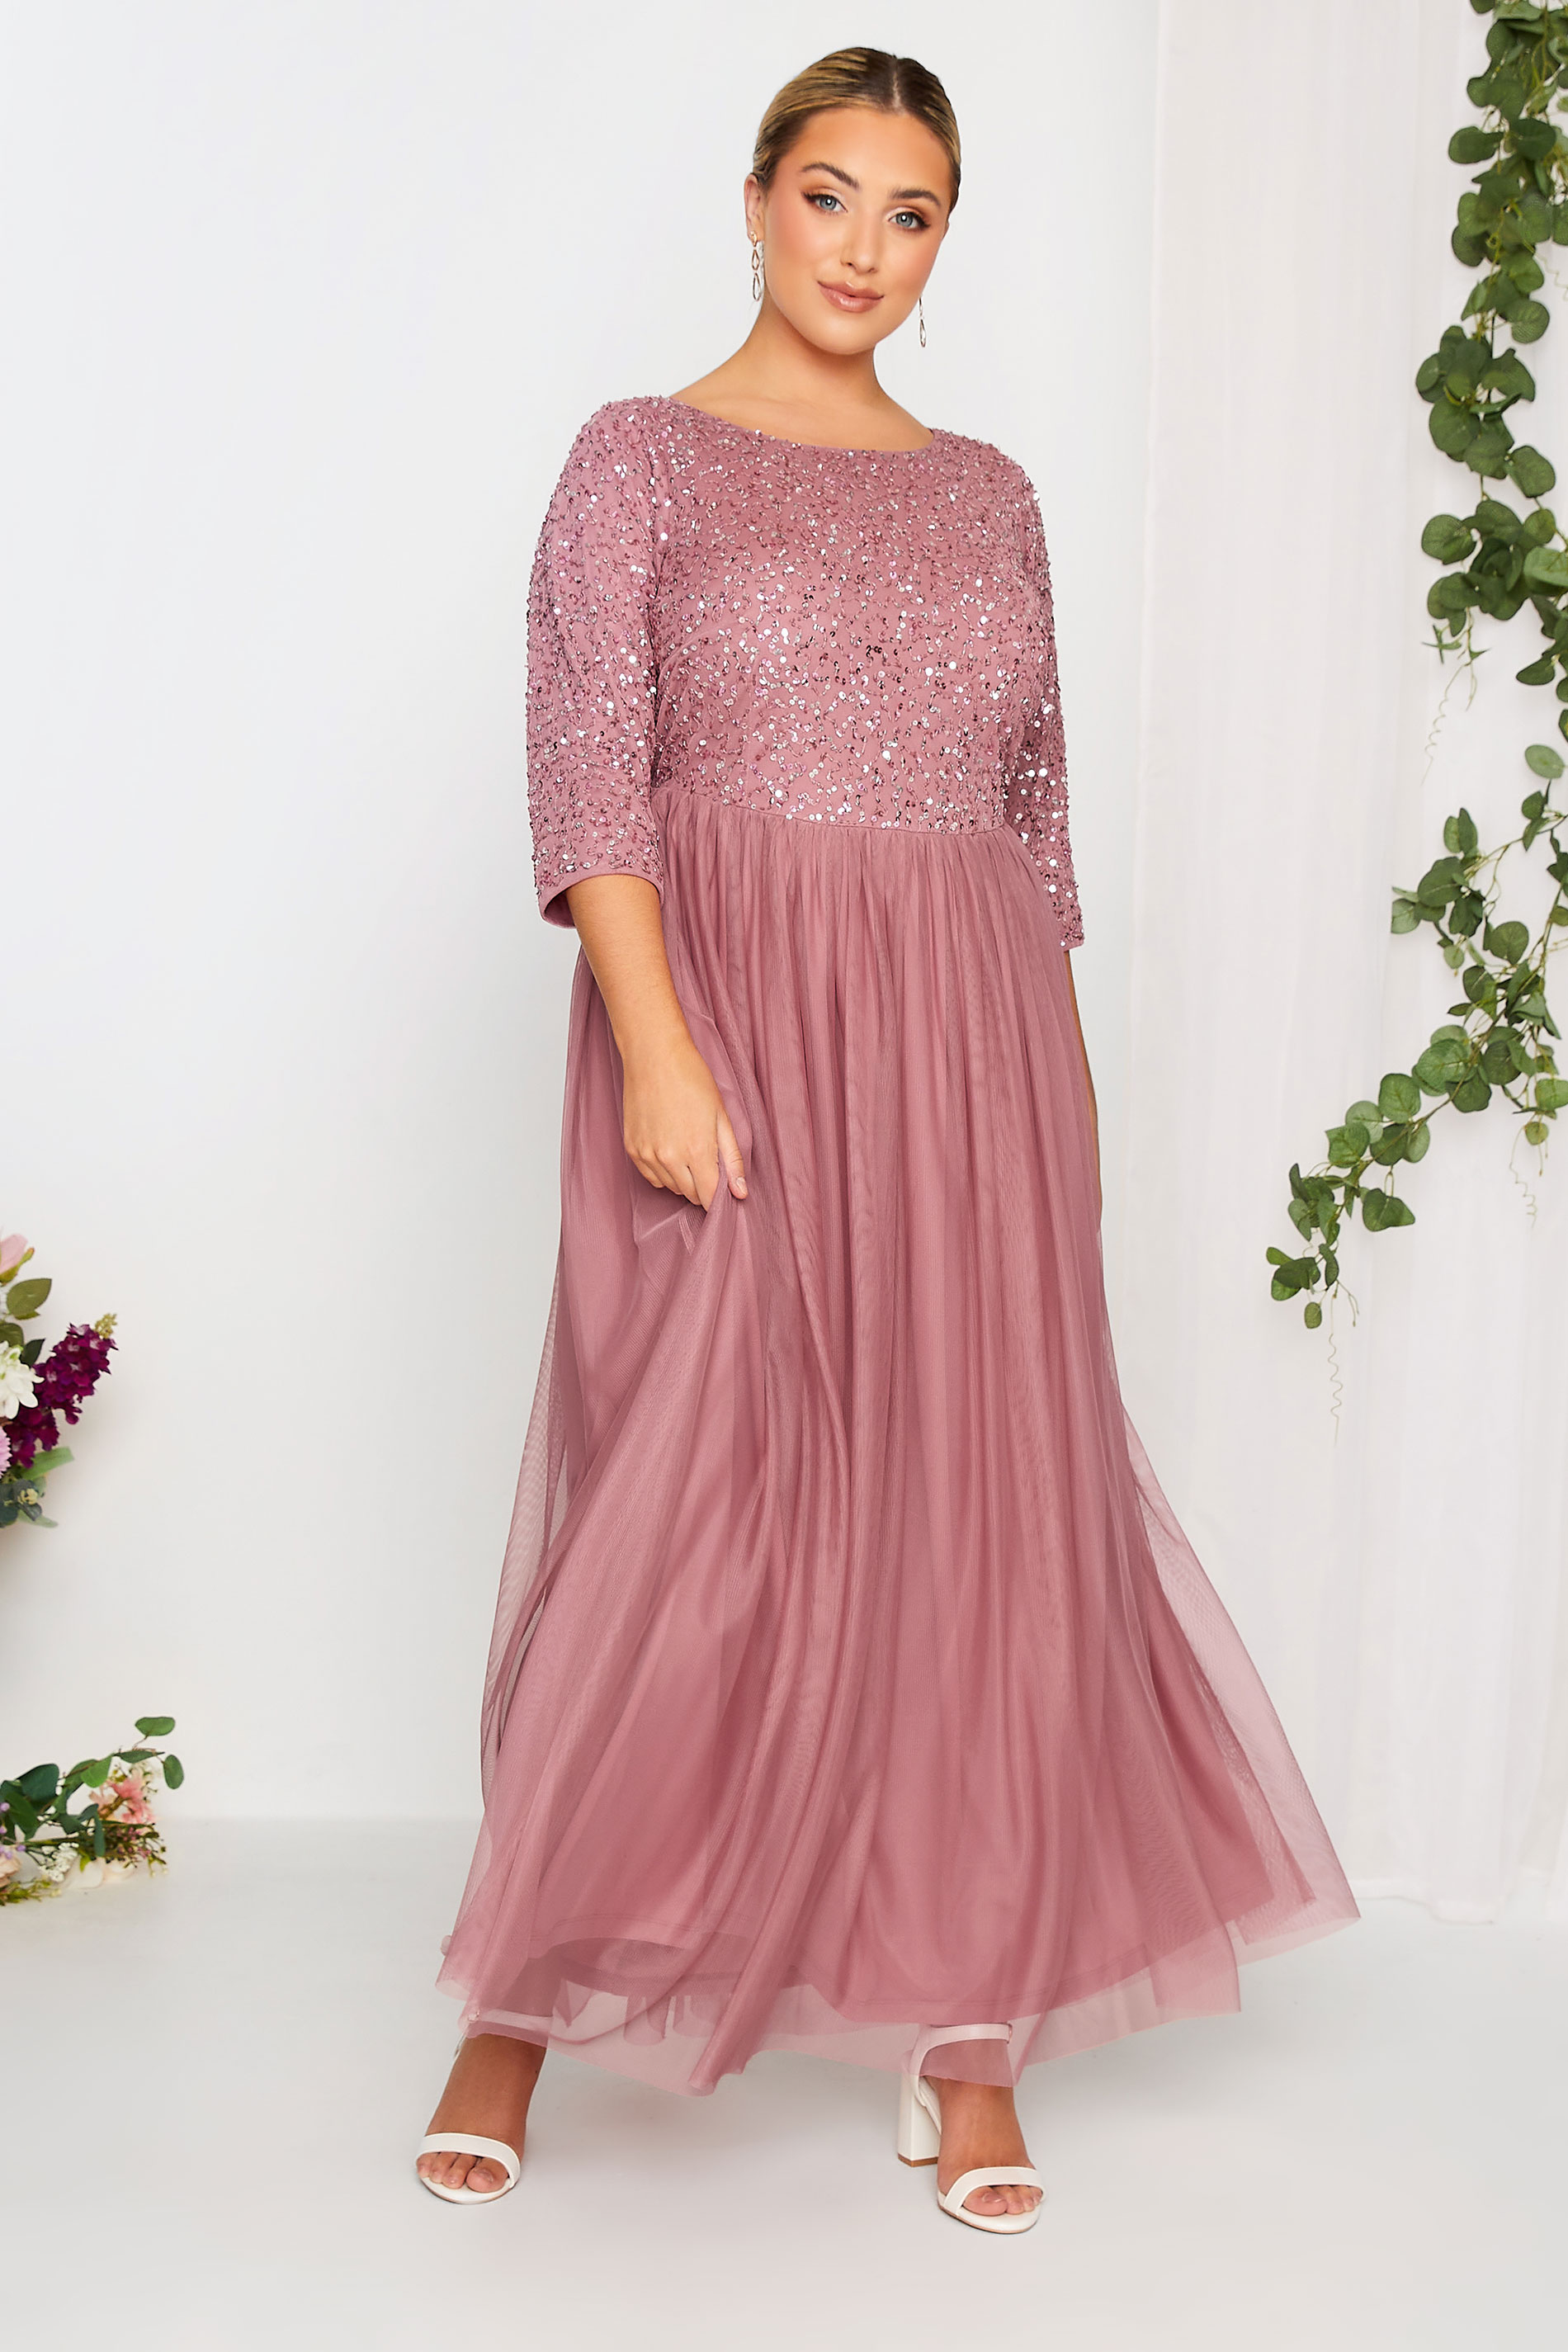 LUXE Plus Size Dark Pink Sequin Hand Embellished Maxi Dress | Yours Clothing  2